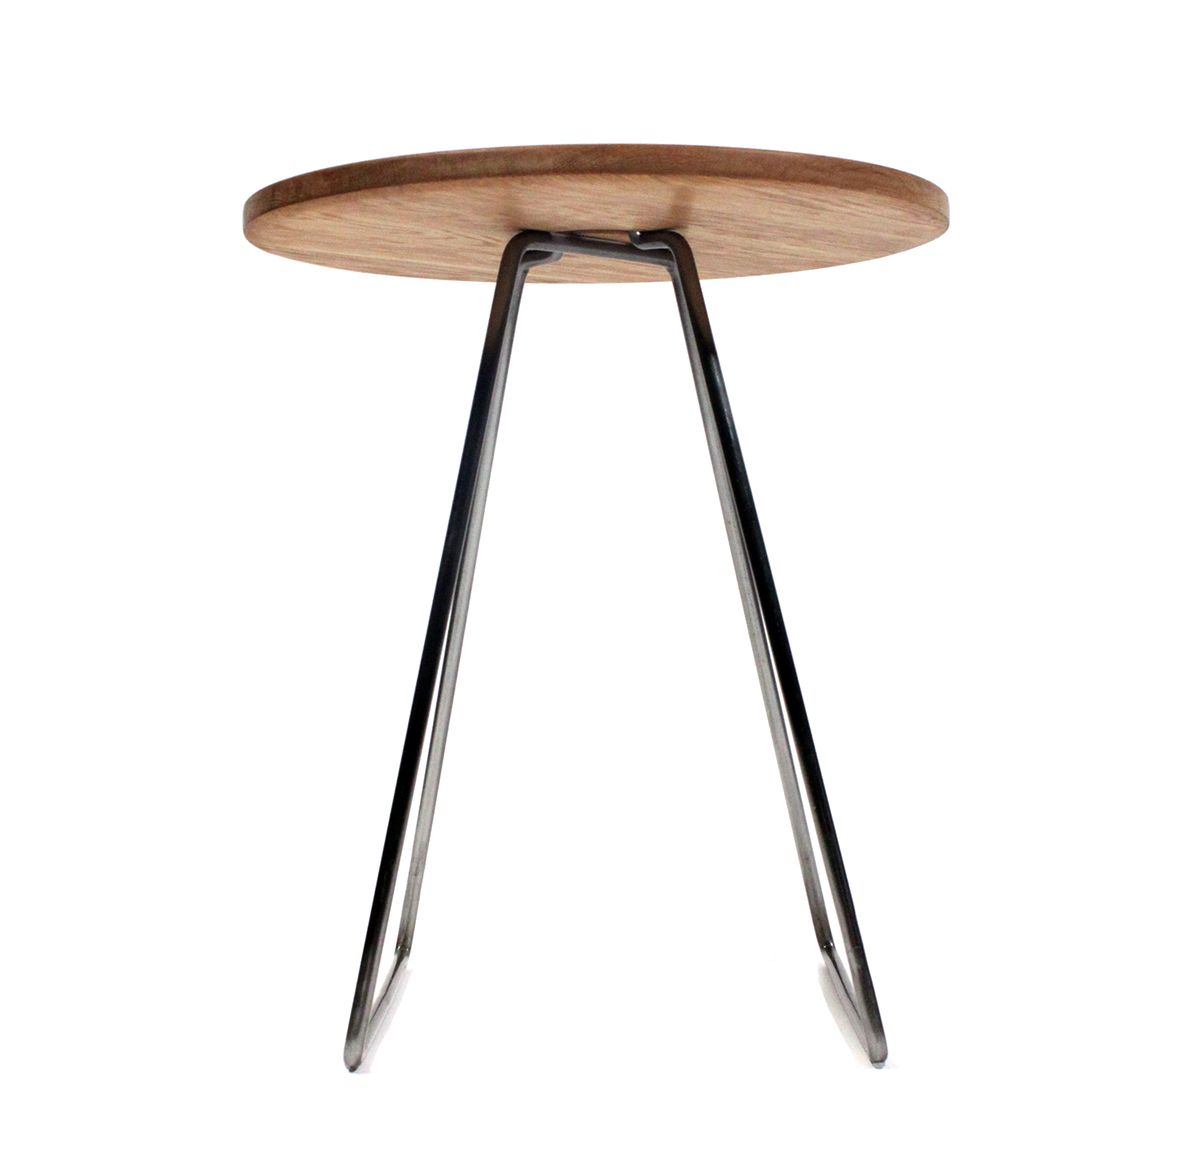 cafe table wood Coffee furniture design